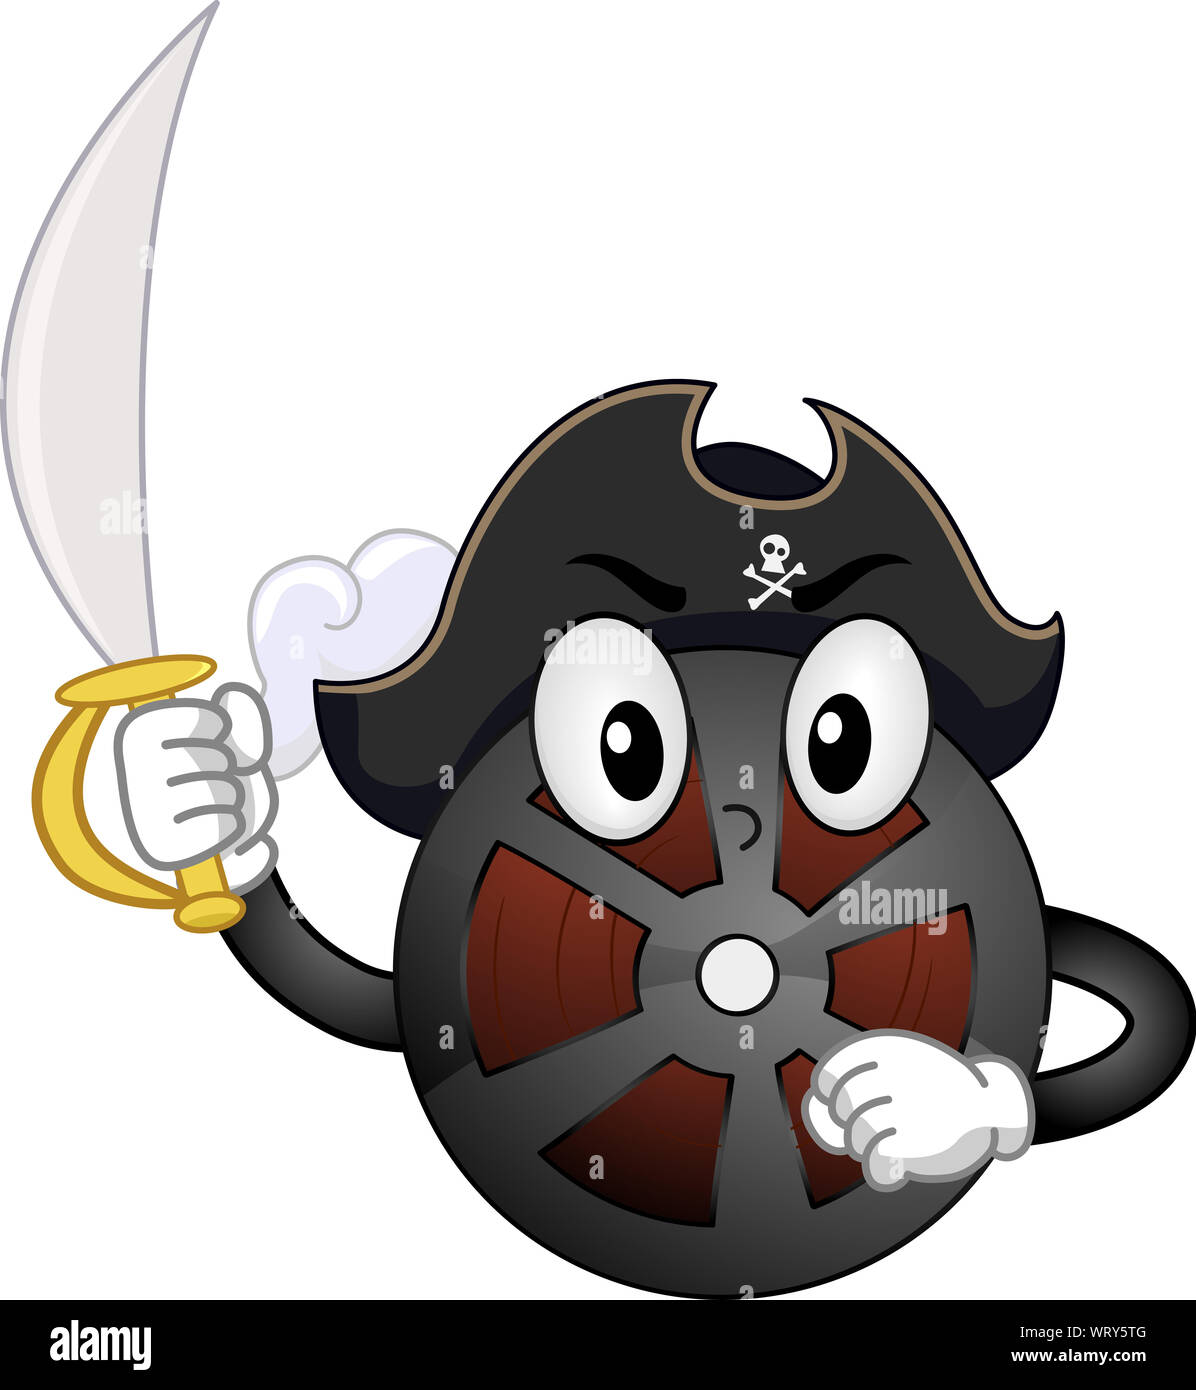 Illustration of a Film Mascot Wearing Pirate Hat and Sword. Film or Movie Piracy Stock Photo